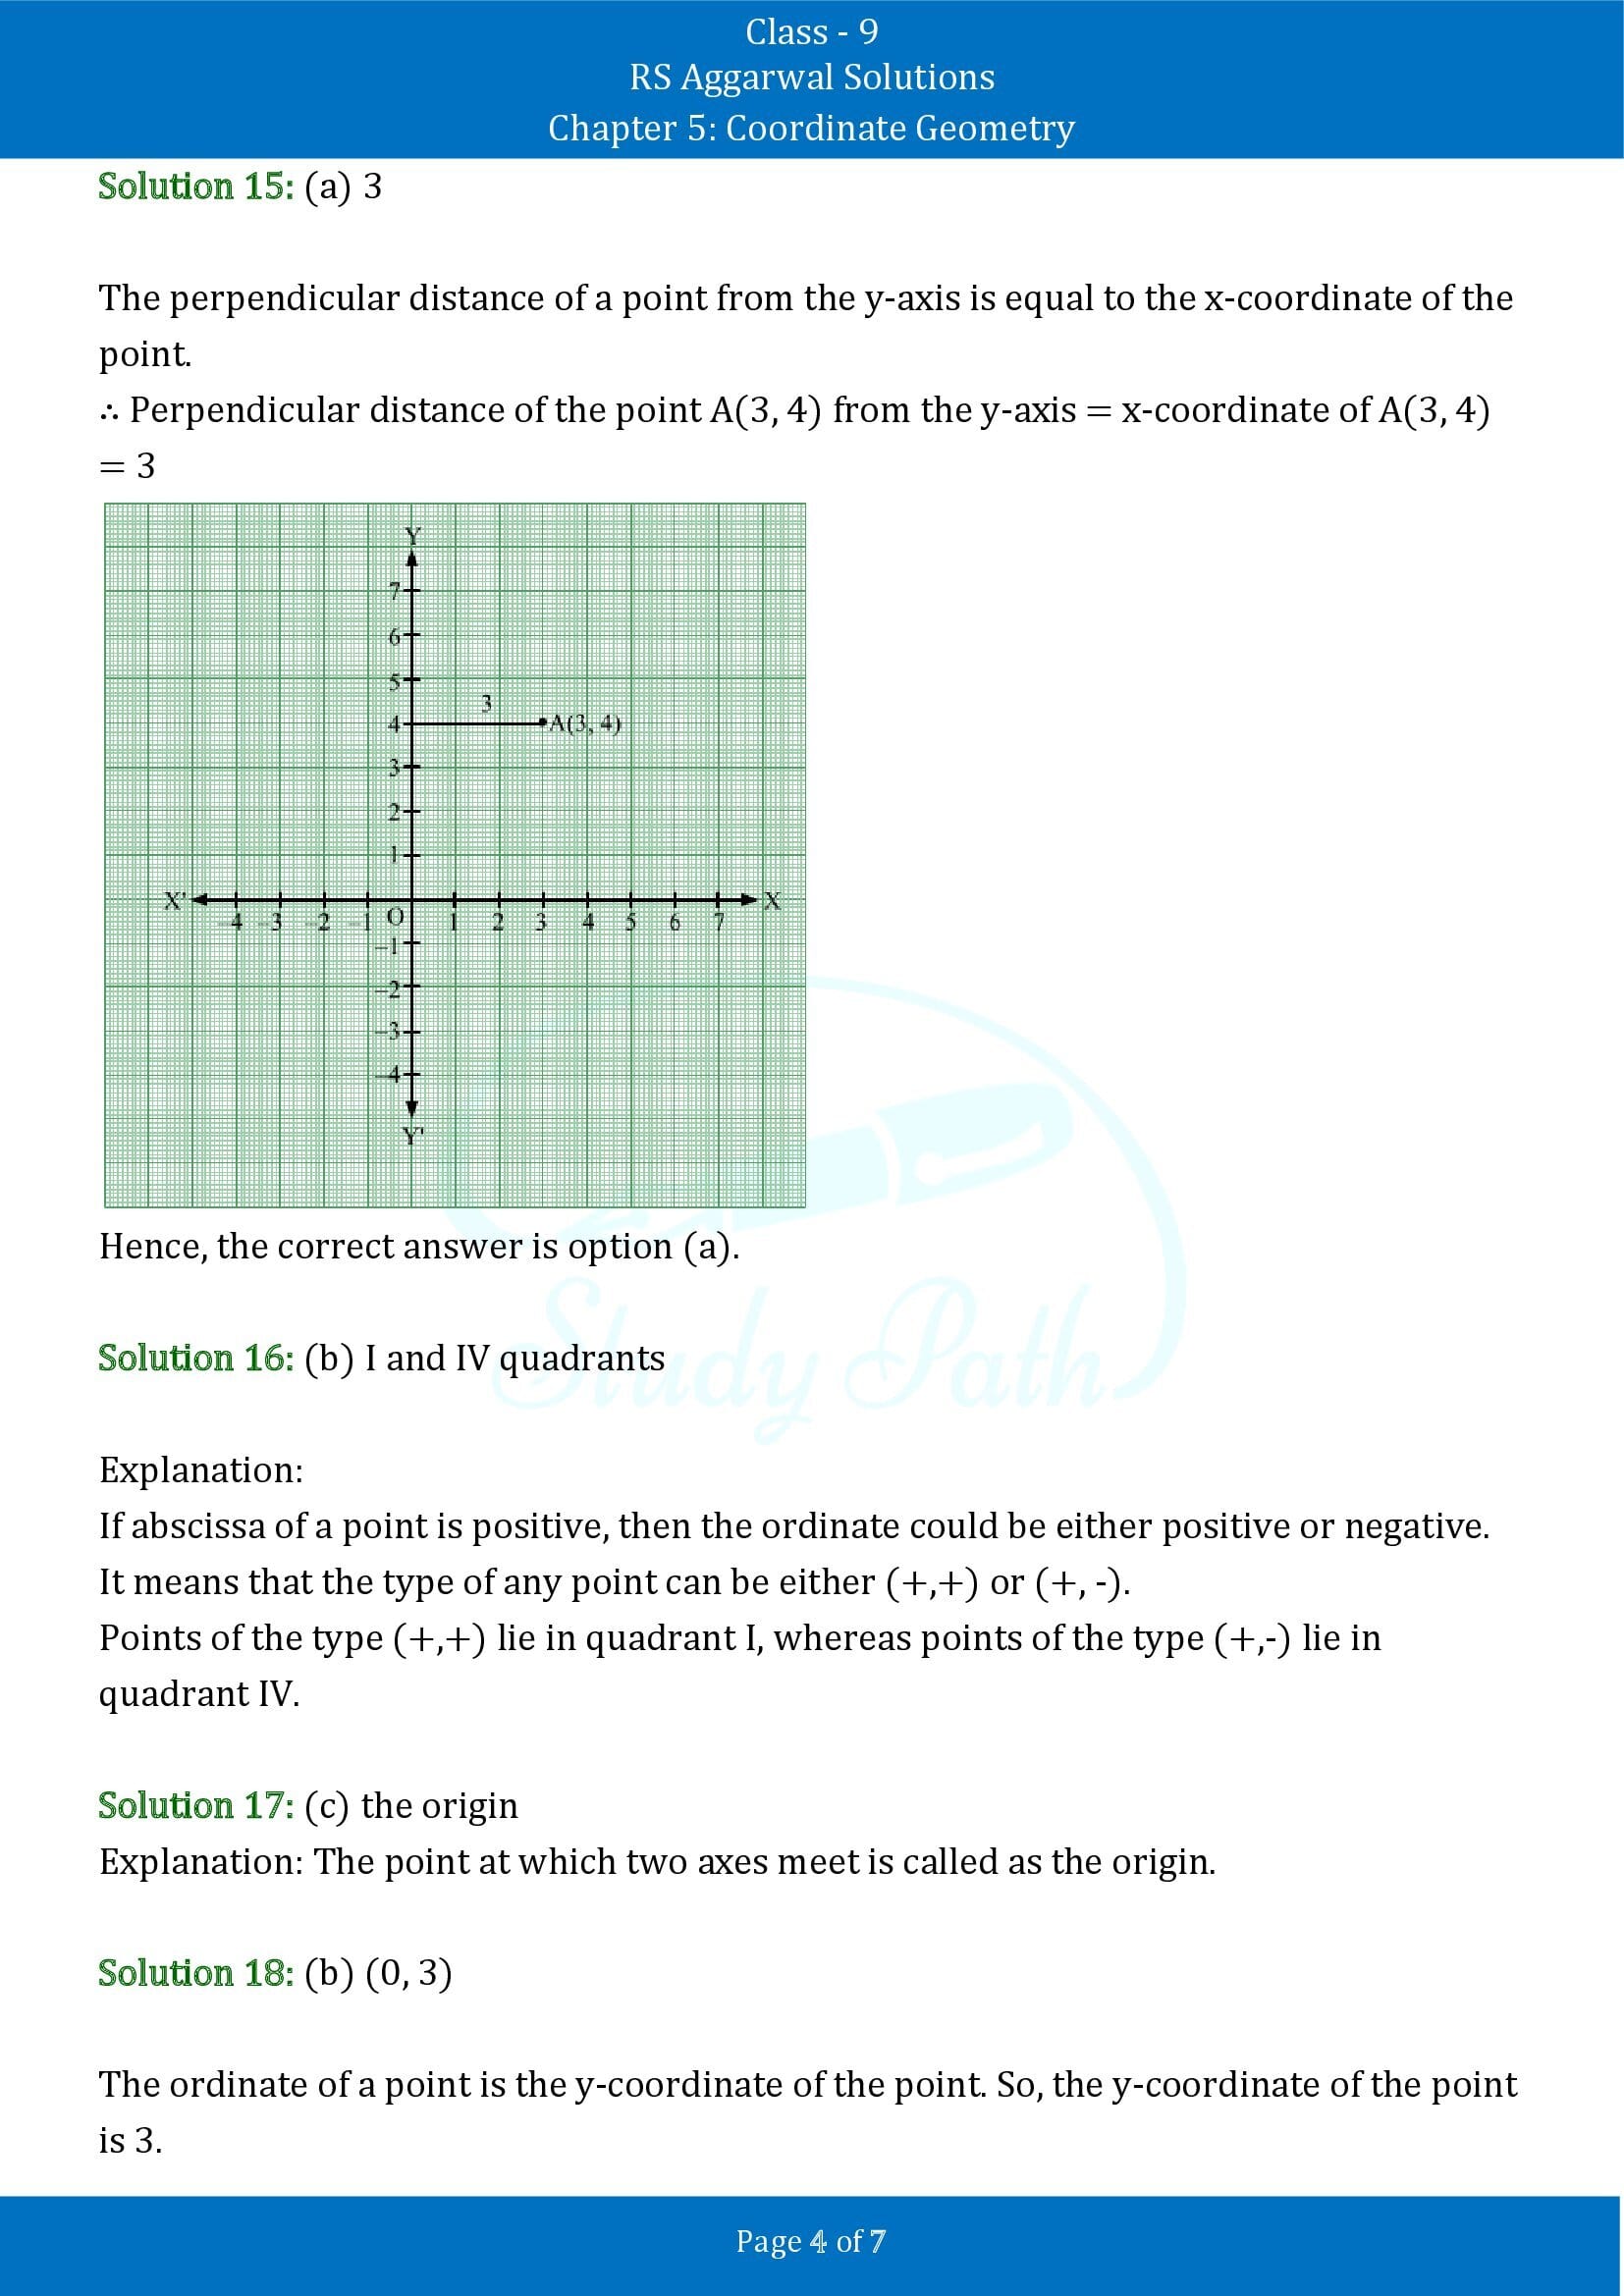 RS Aggarwal Solutions Class 9 Chapter 5 Coordinate Geometry Multiple Choice Questions MCQs 00004